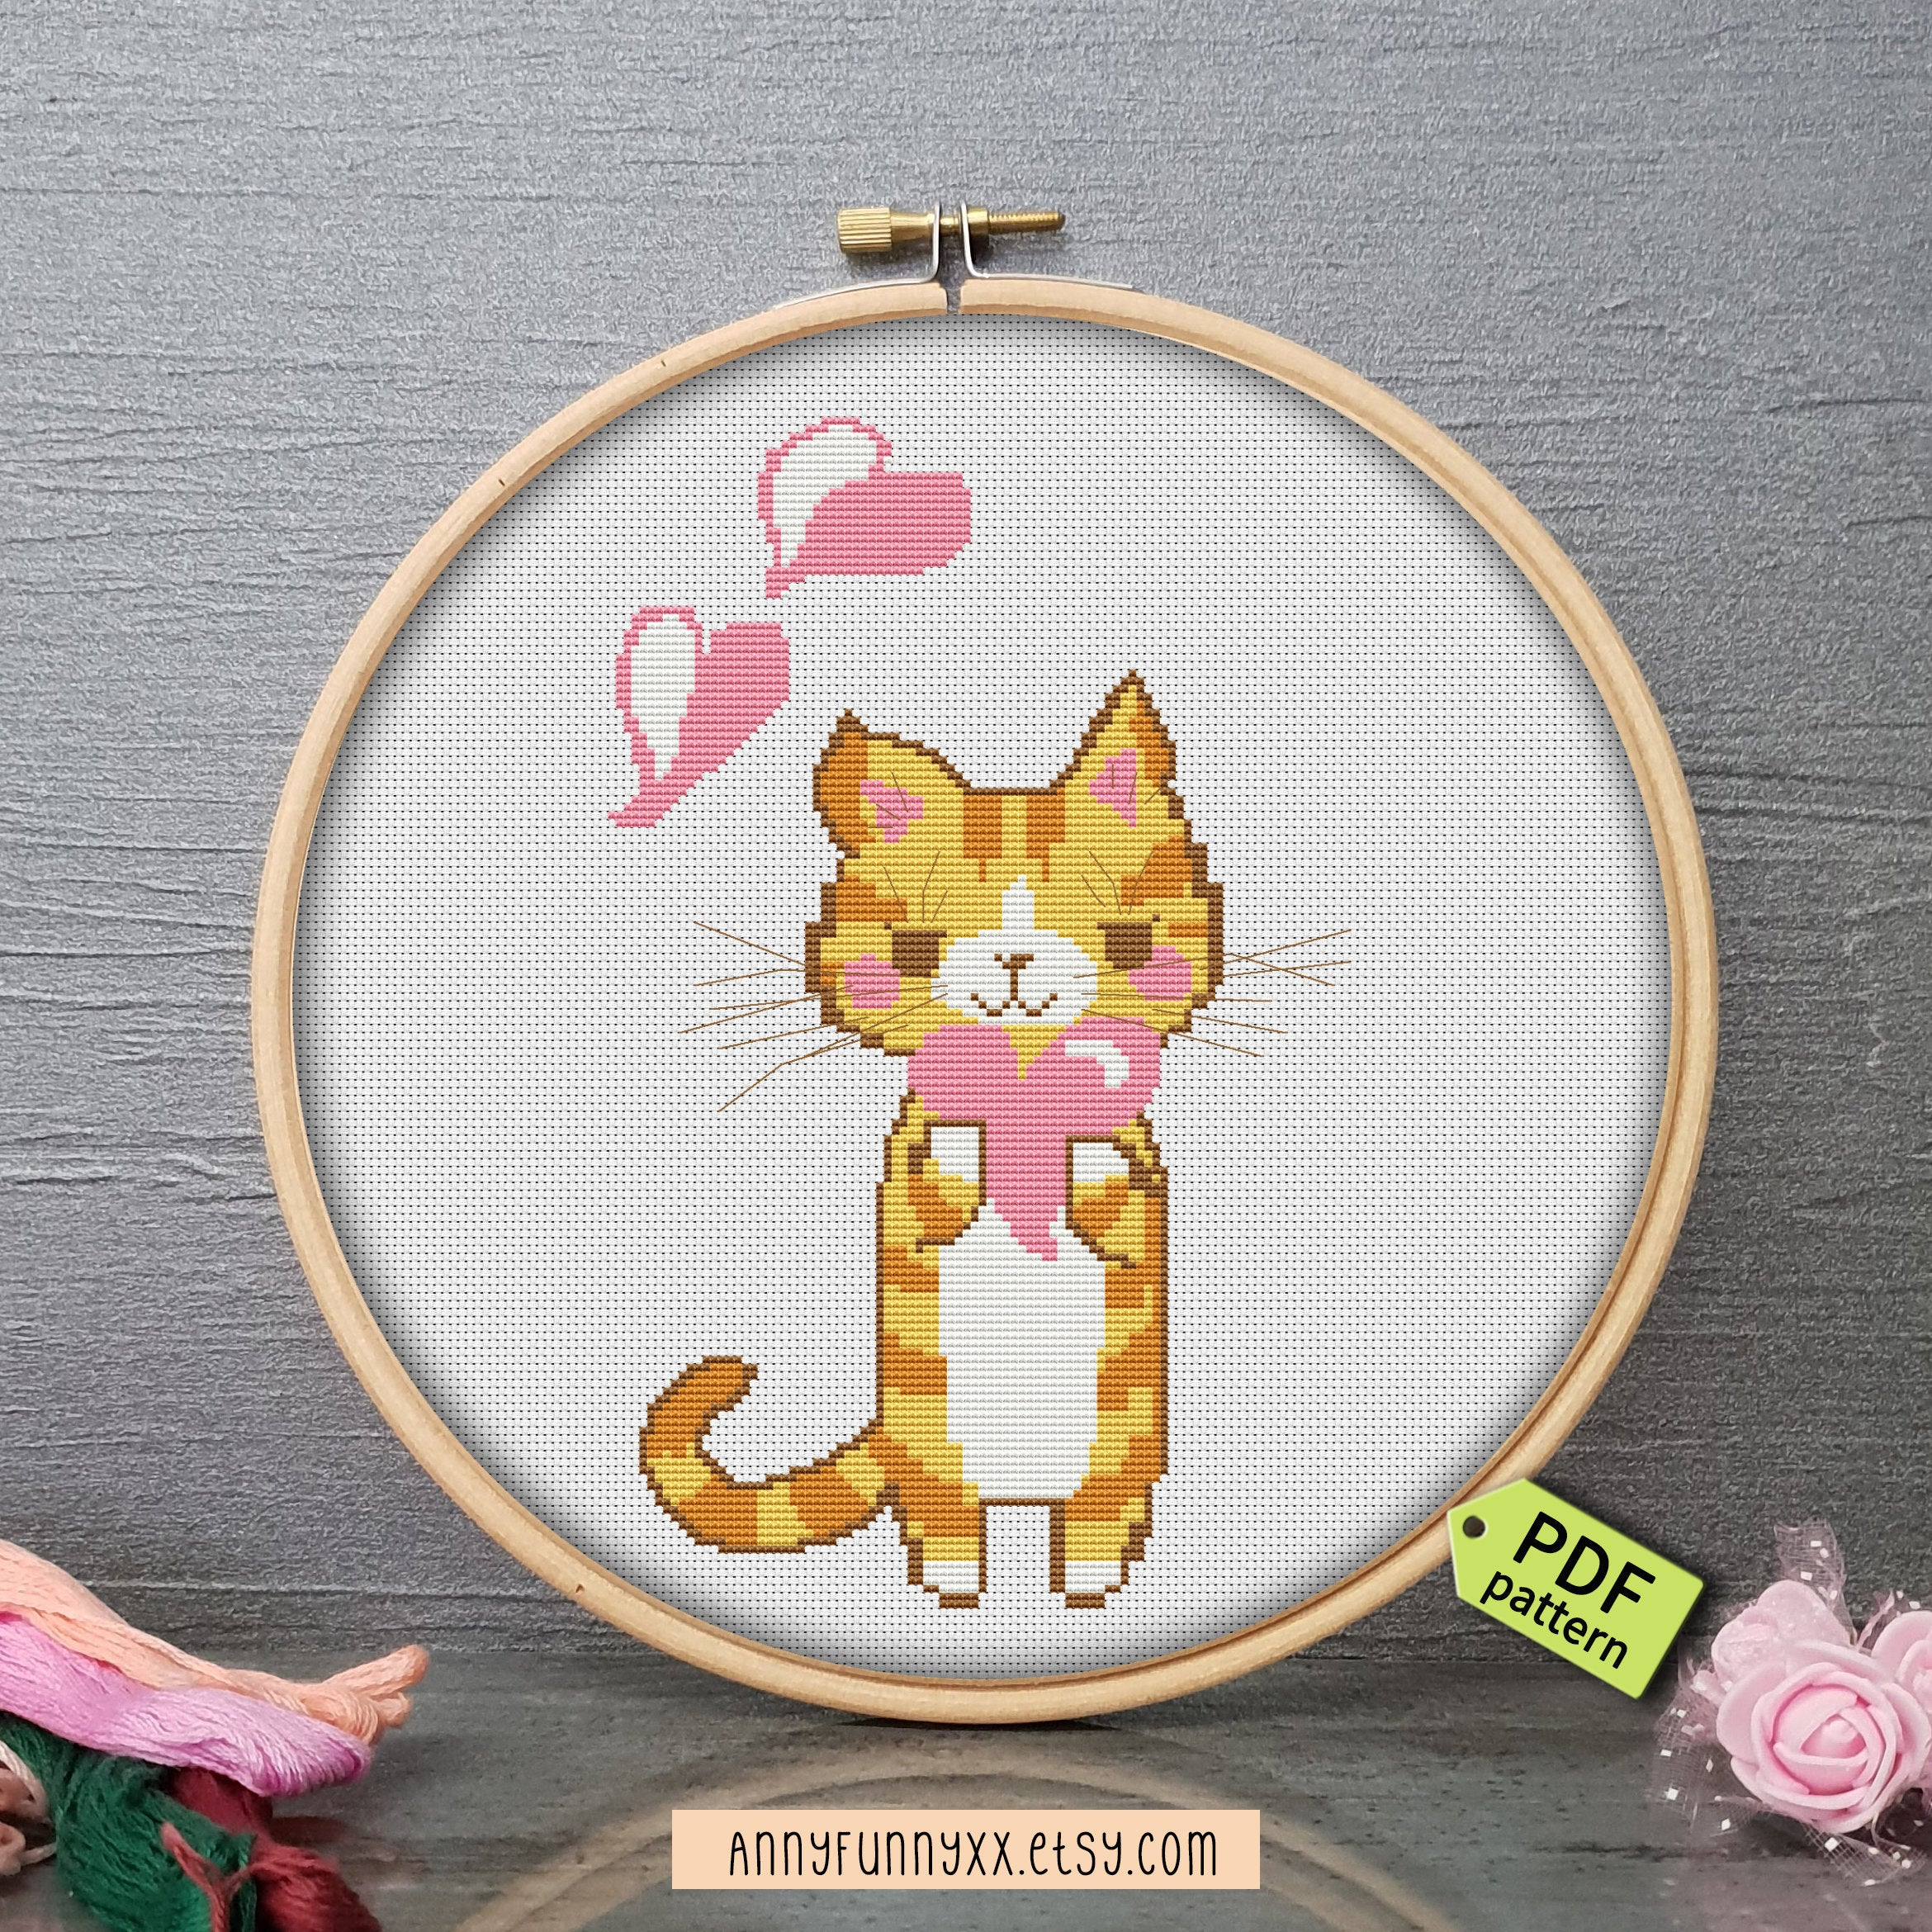 Funny Embroidery Patterns Cute Cat Cross Stitch Pattern Pdf Funny Embroidery Patterns Lovely Small Cat With Heart Valentines Day Gift Embroidery Pattern